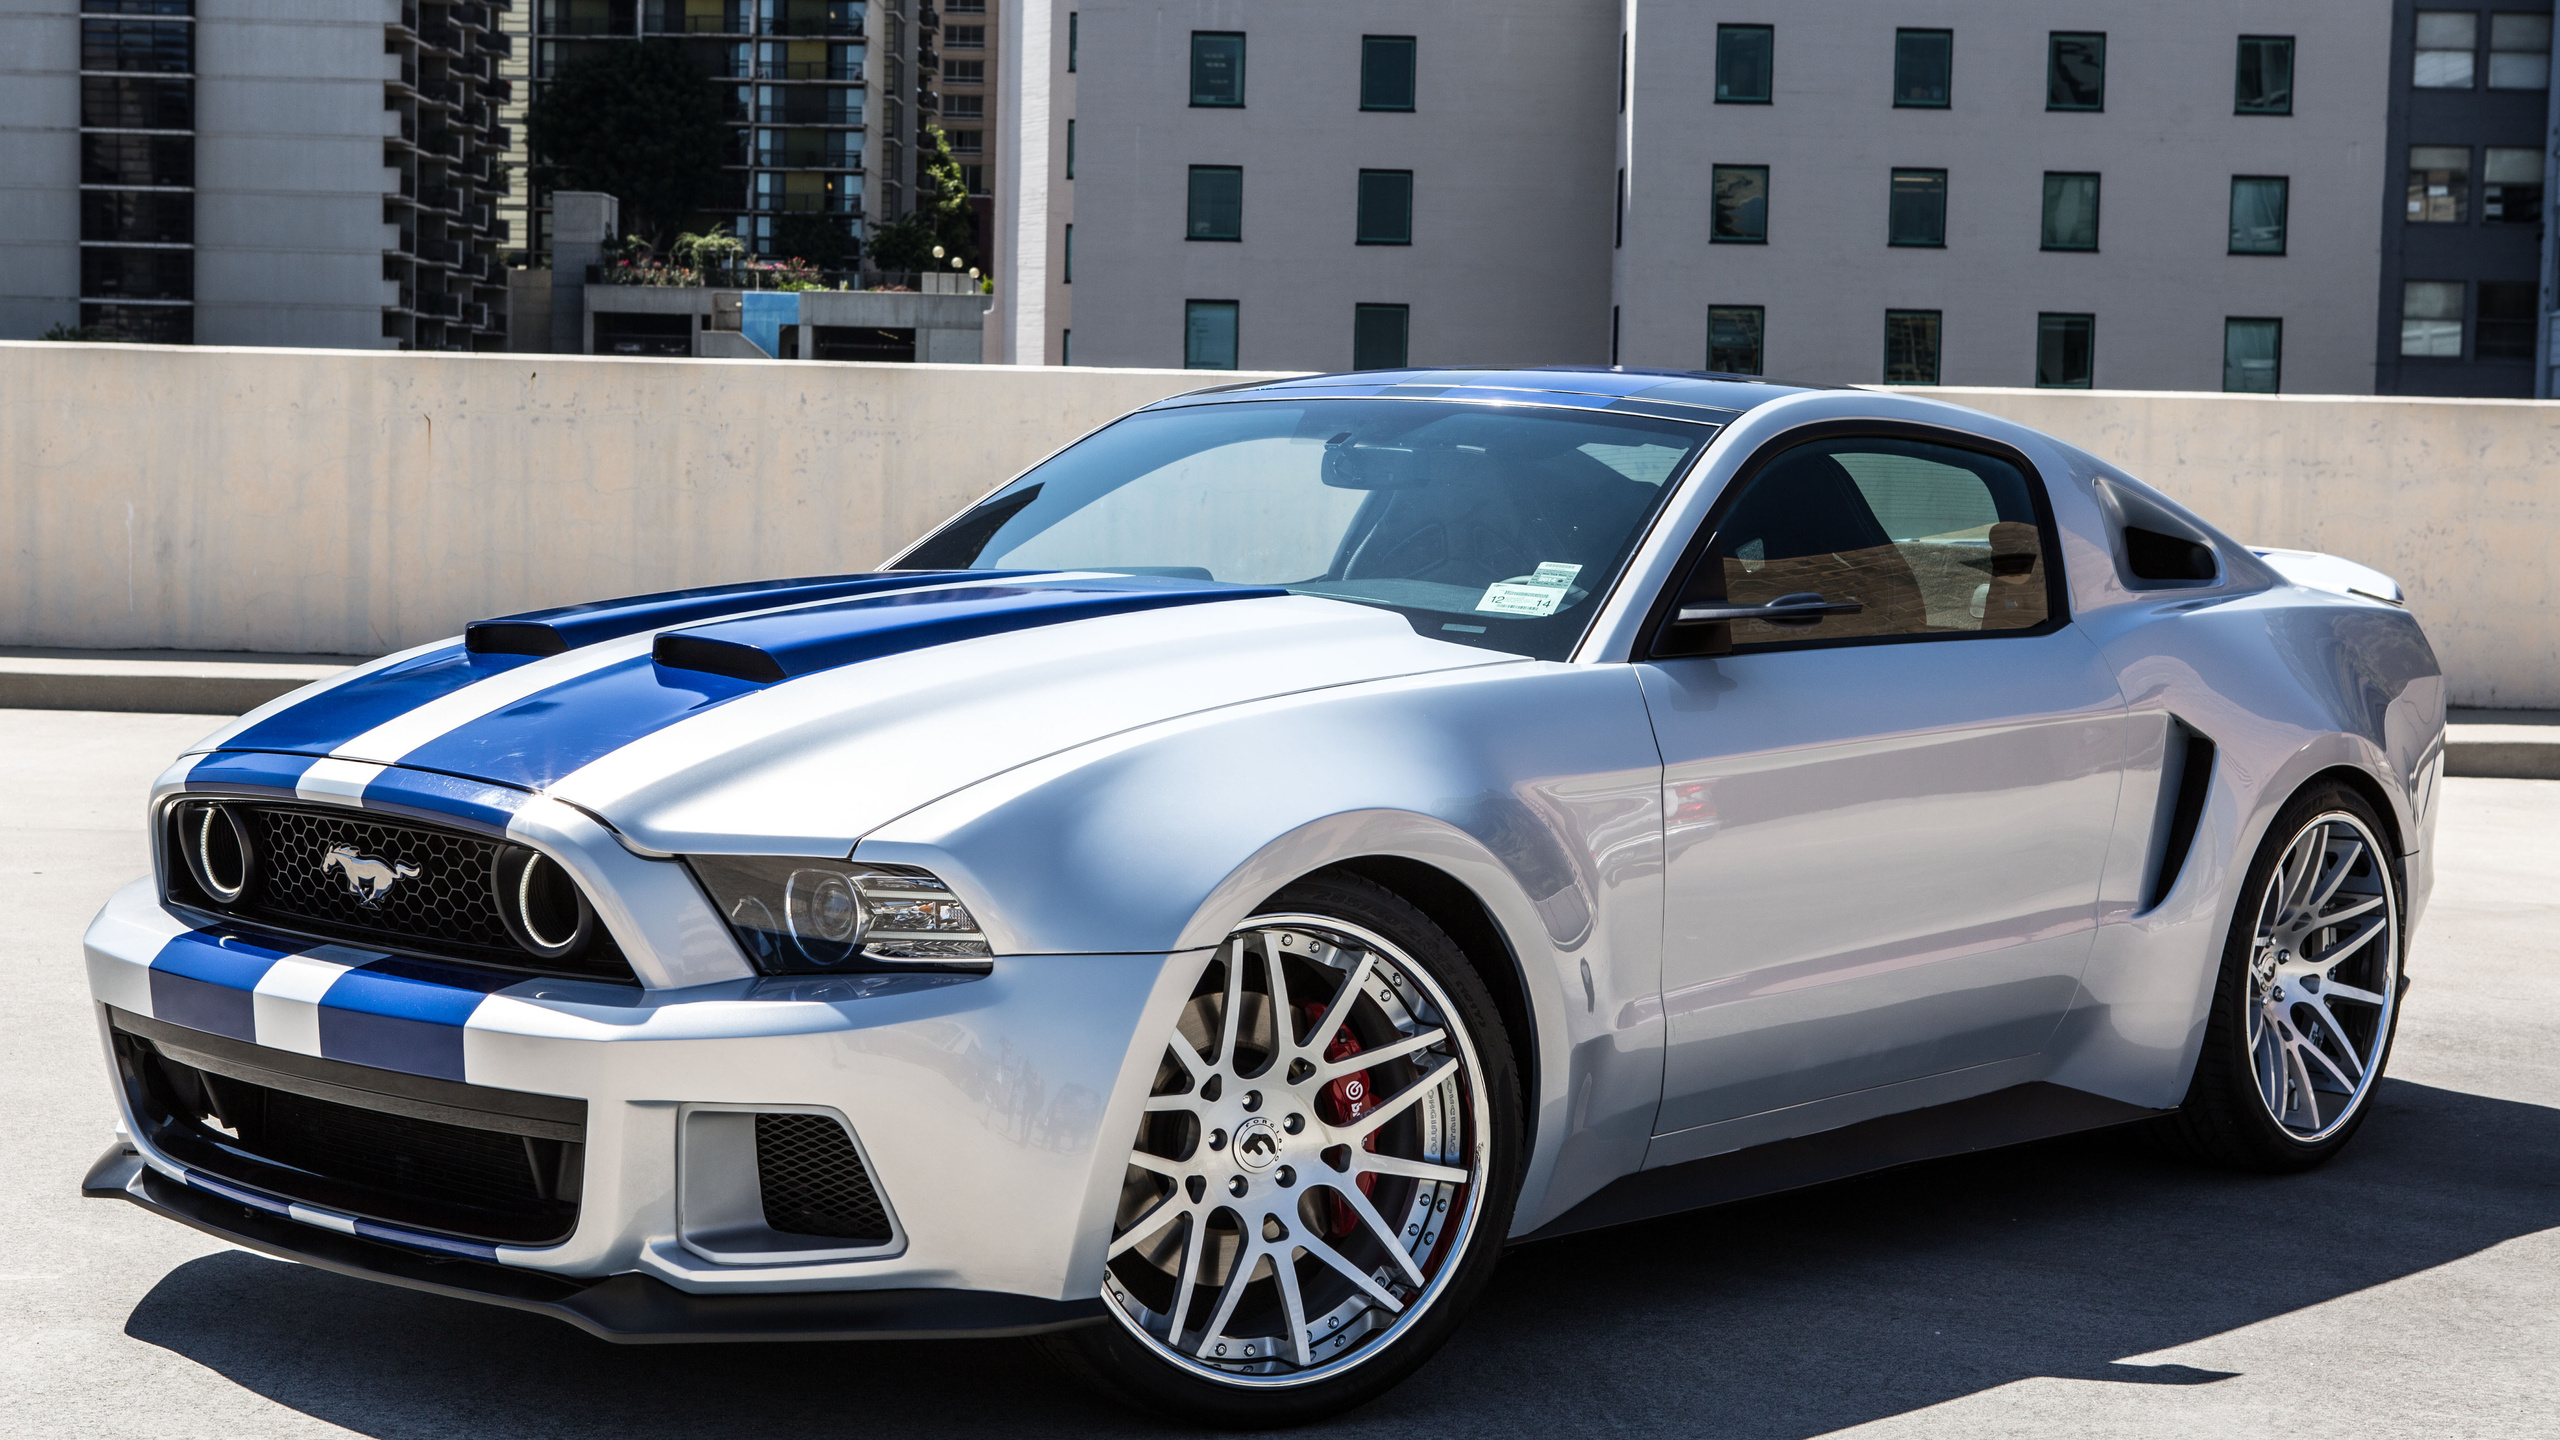 High Resolution Wallpaper | Ford Mustang Shelby 2560x1440 px